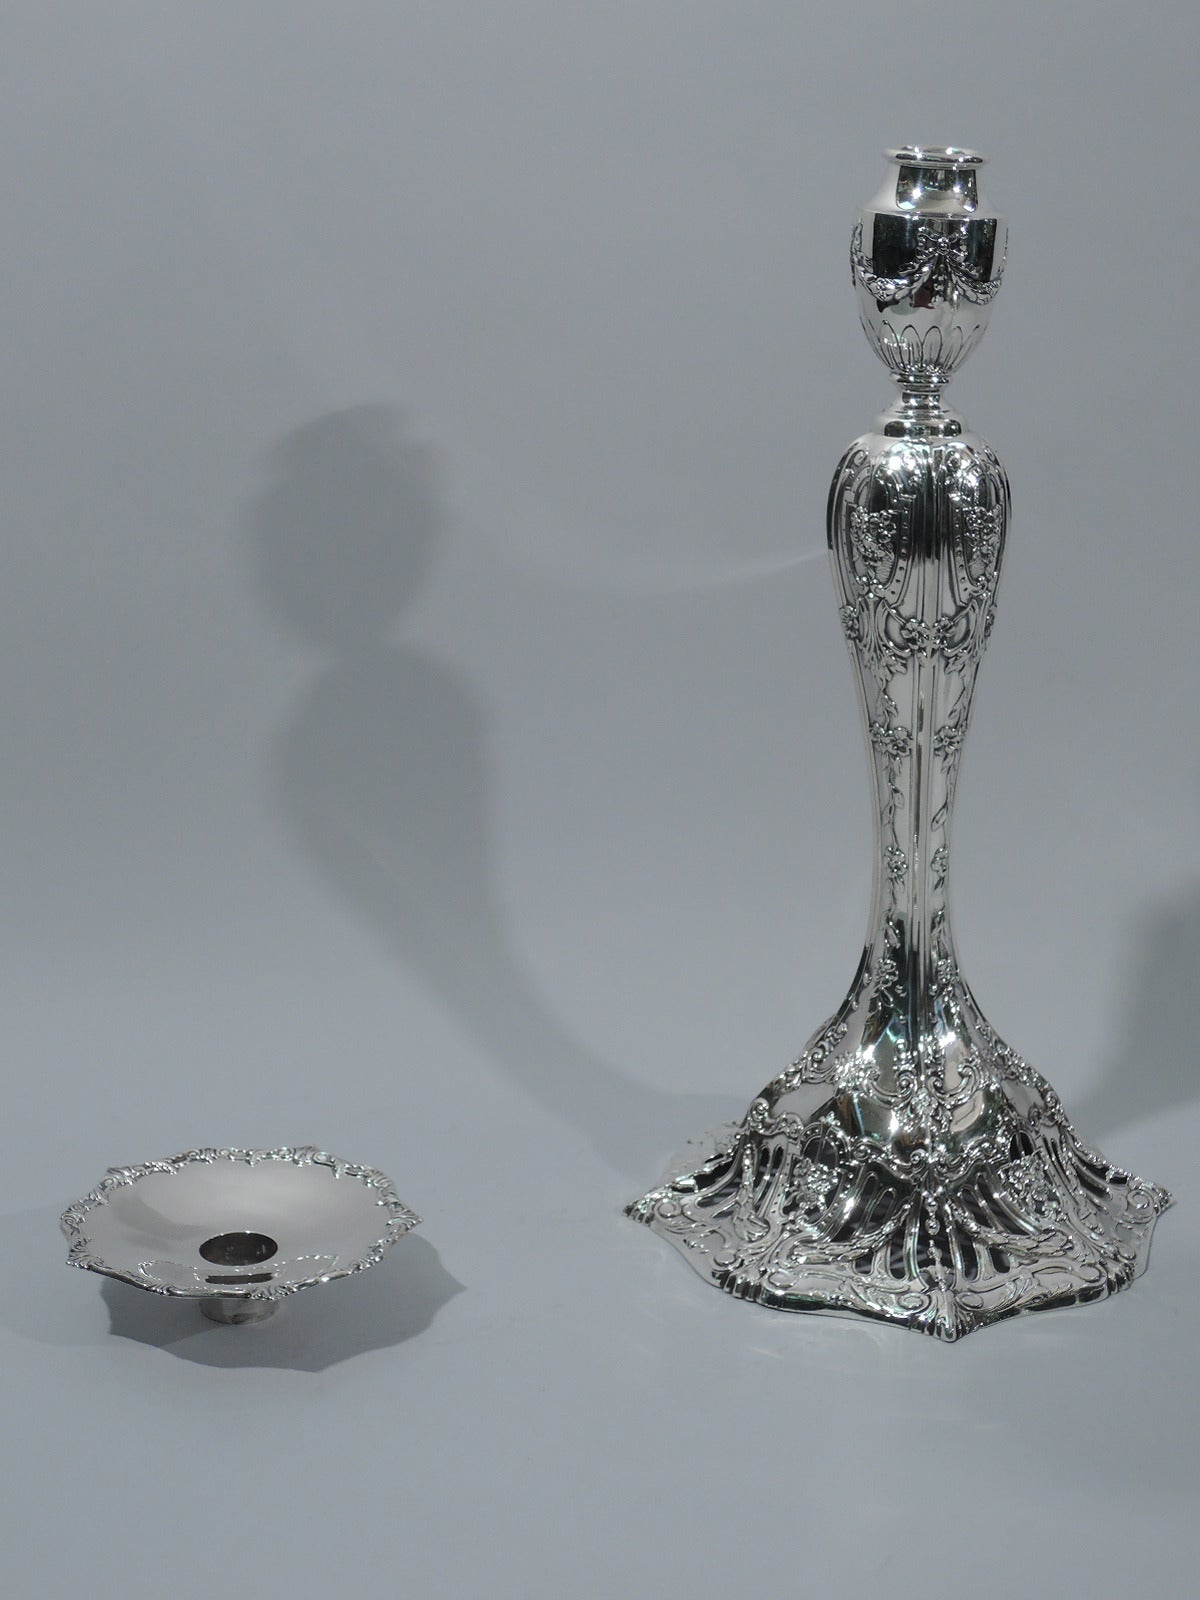 Edwardian Tall and Fancy Sterling Silver Candlesticks from Caldwell of Philadelphia